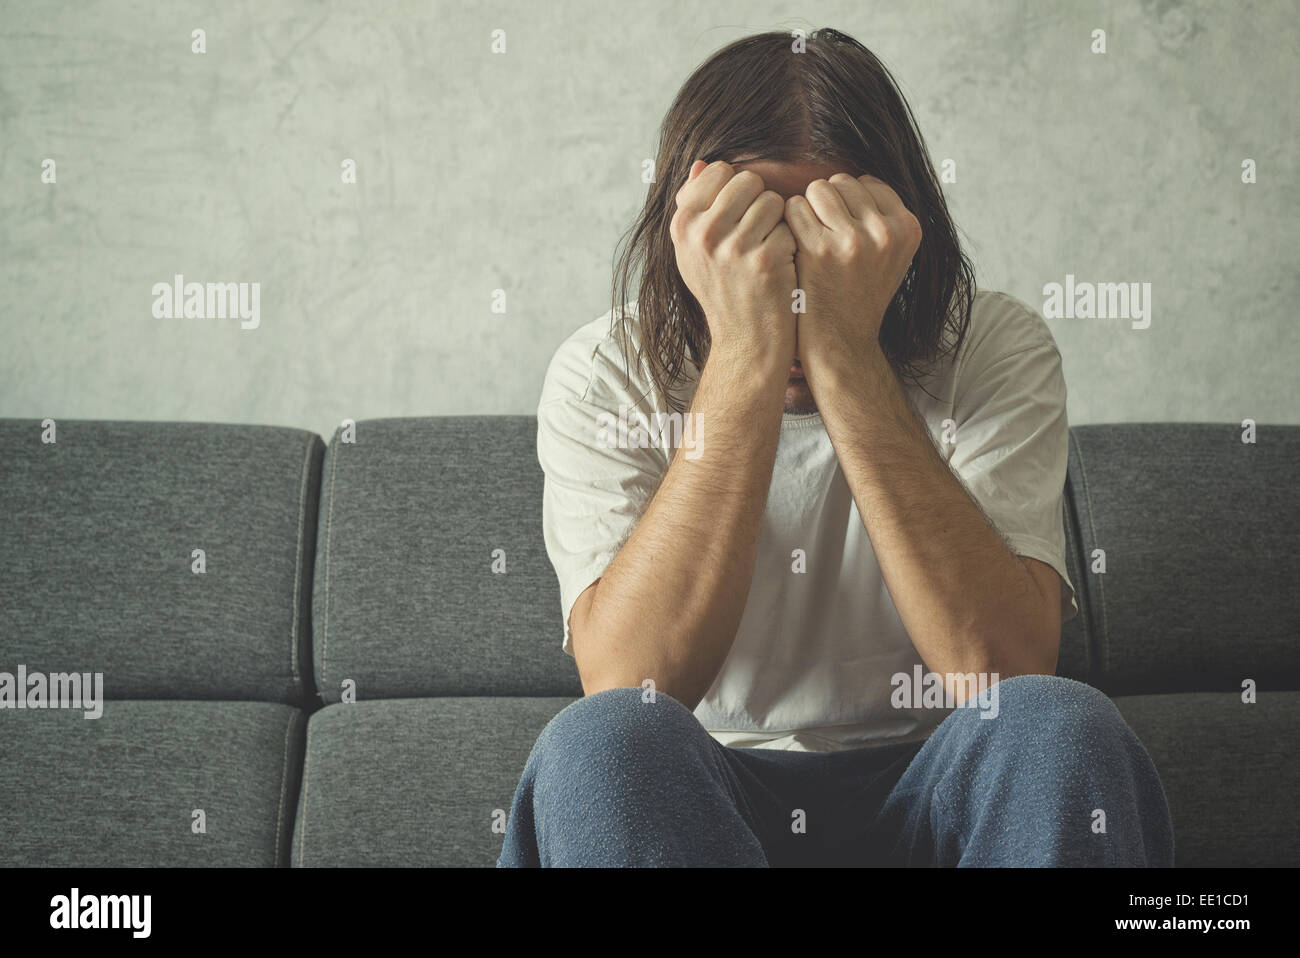 Depressed and sad man on the couch in the room, covering face and crying in despair. Stock Photo